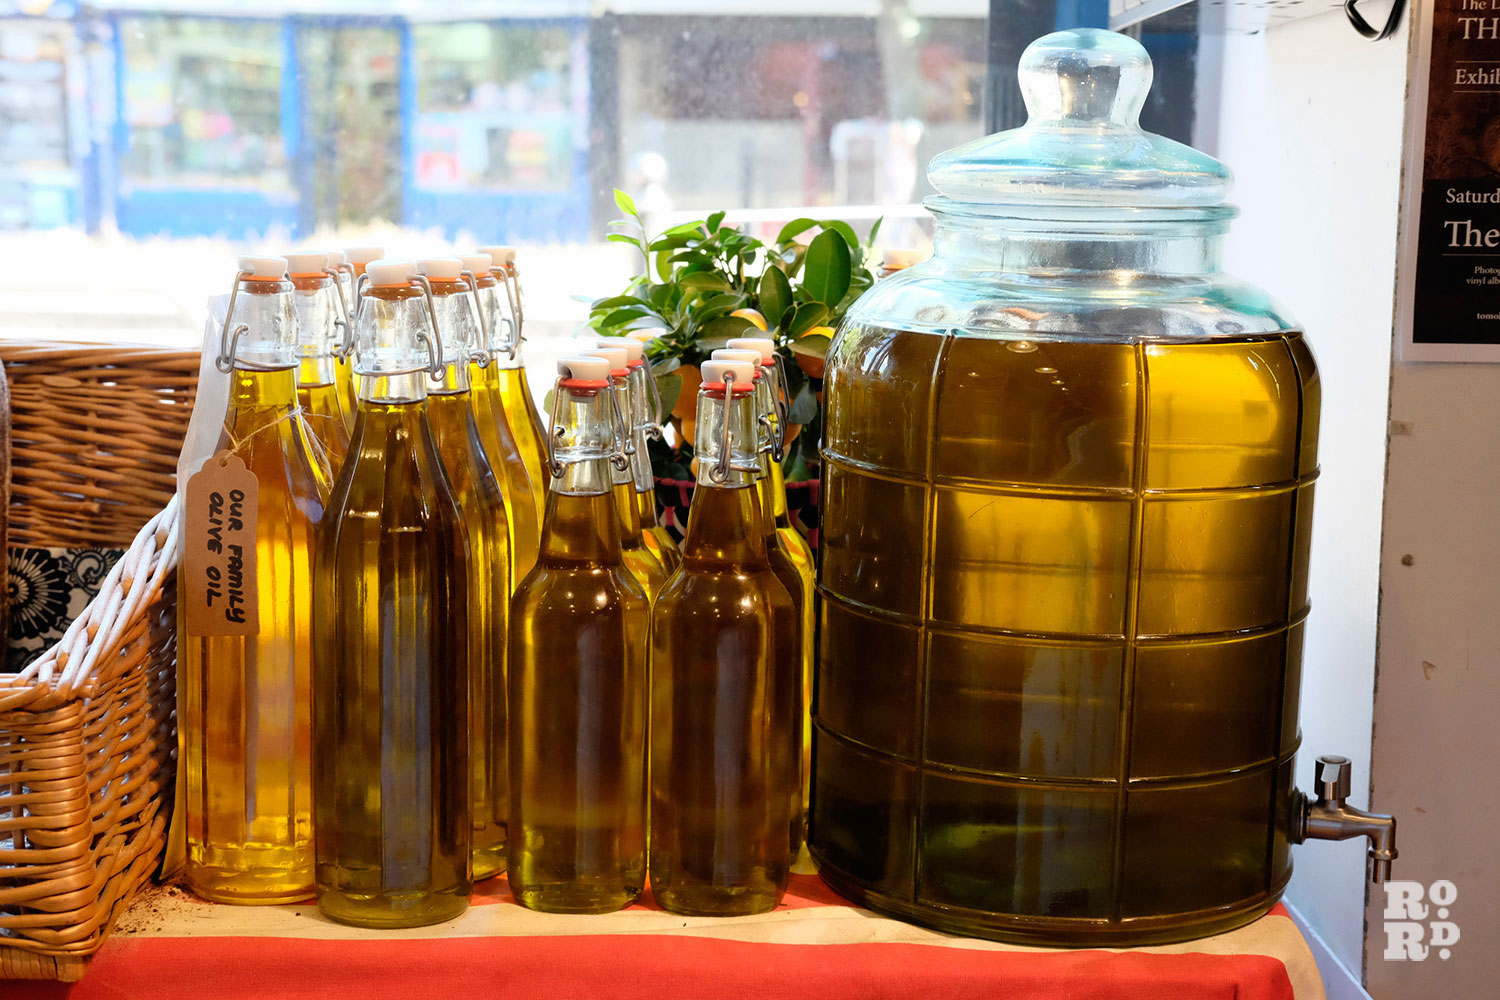 Photograph of their homemade olive oil